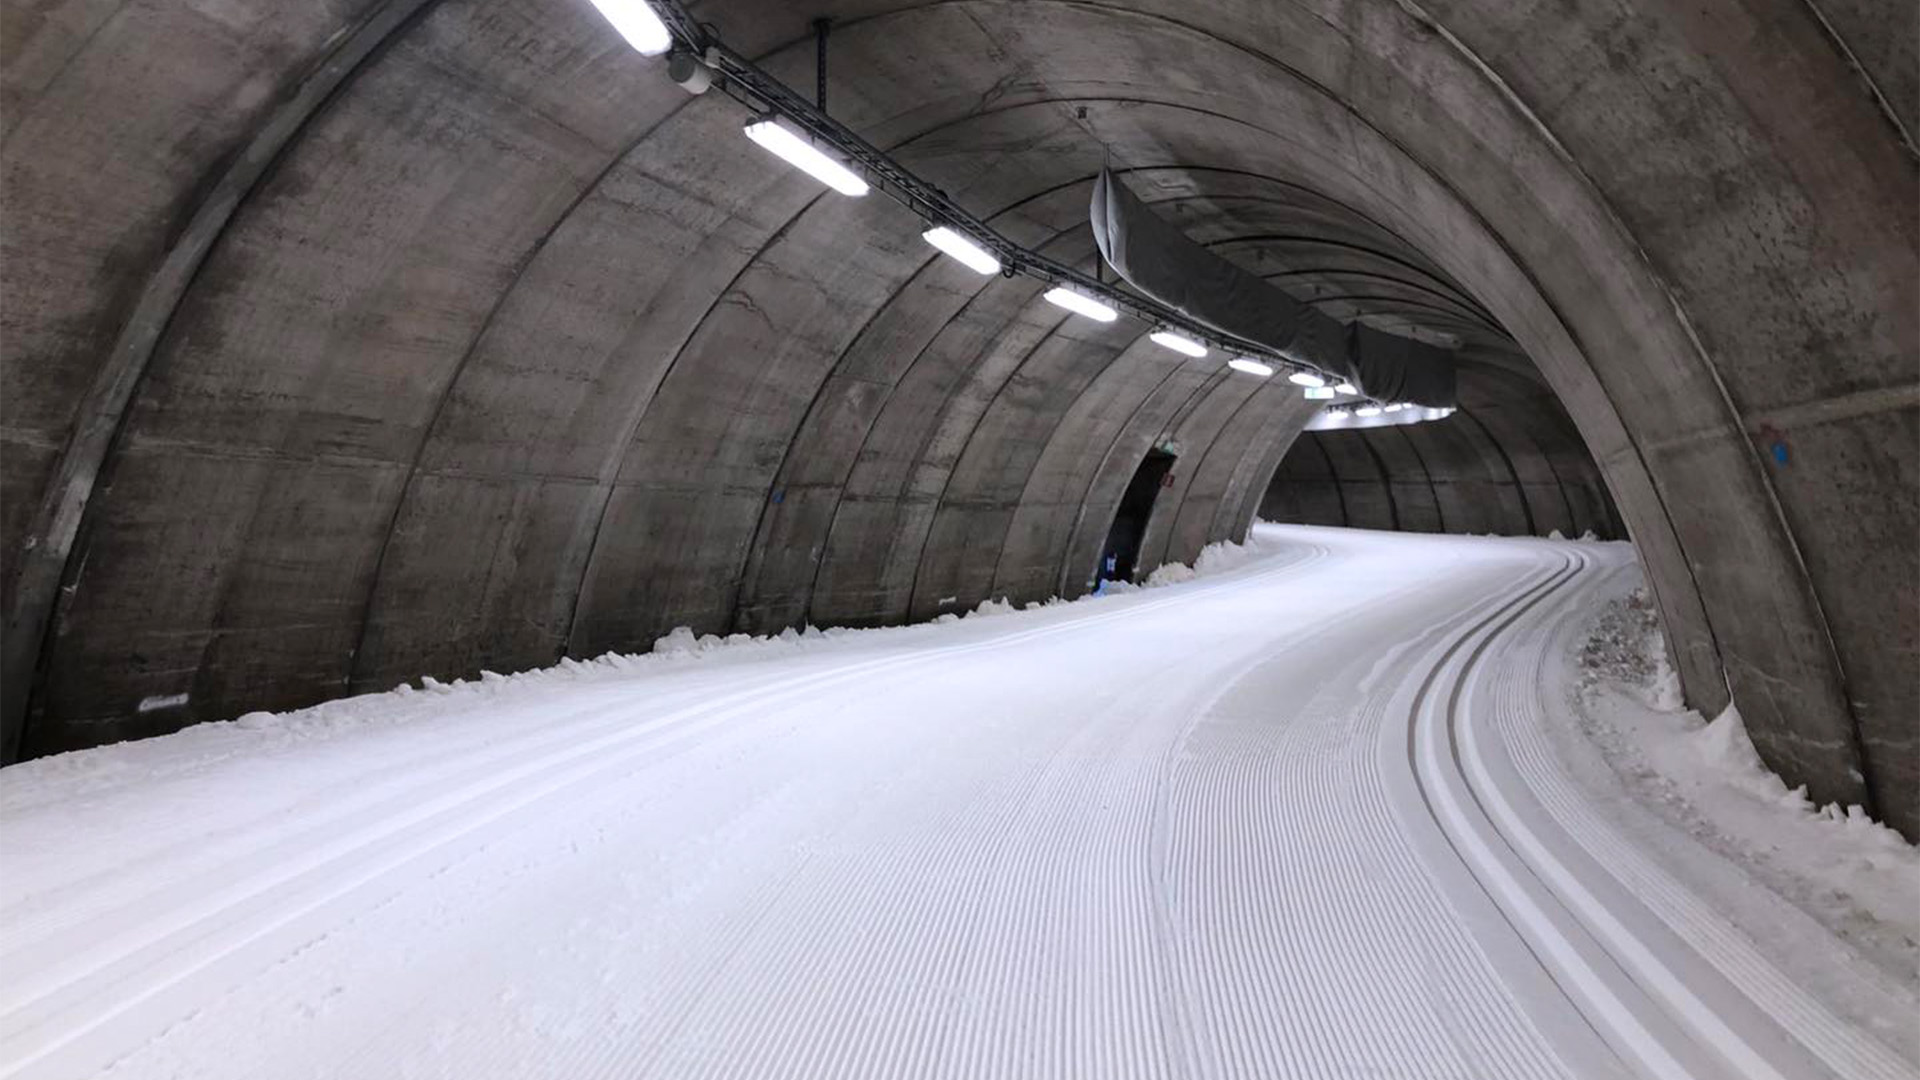 Permafrost and concrete: The dystopian future of skiing